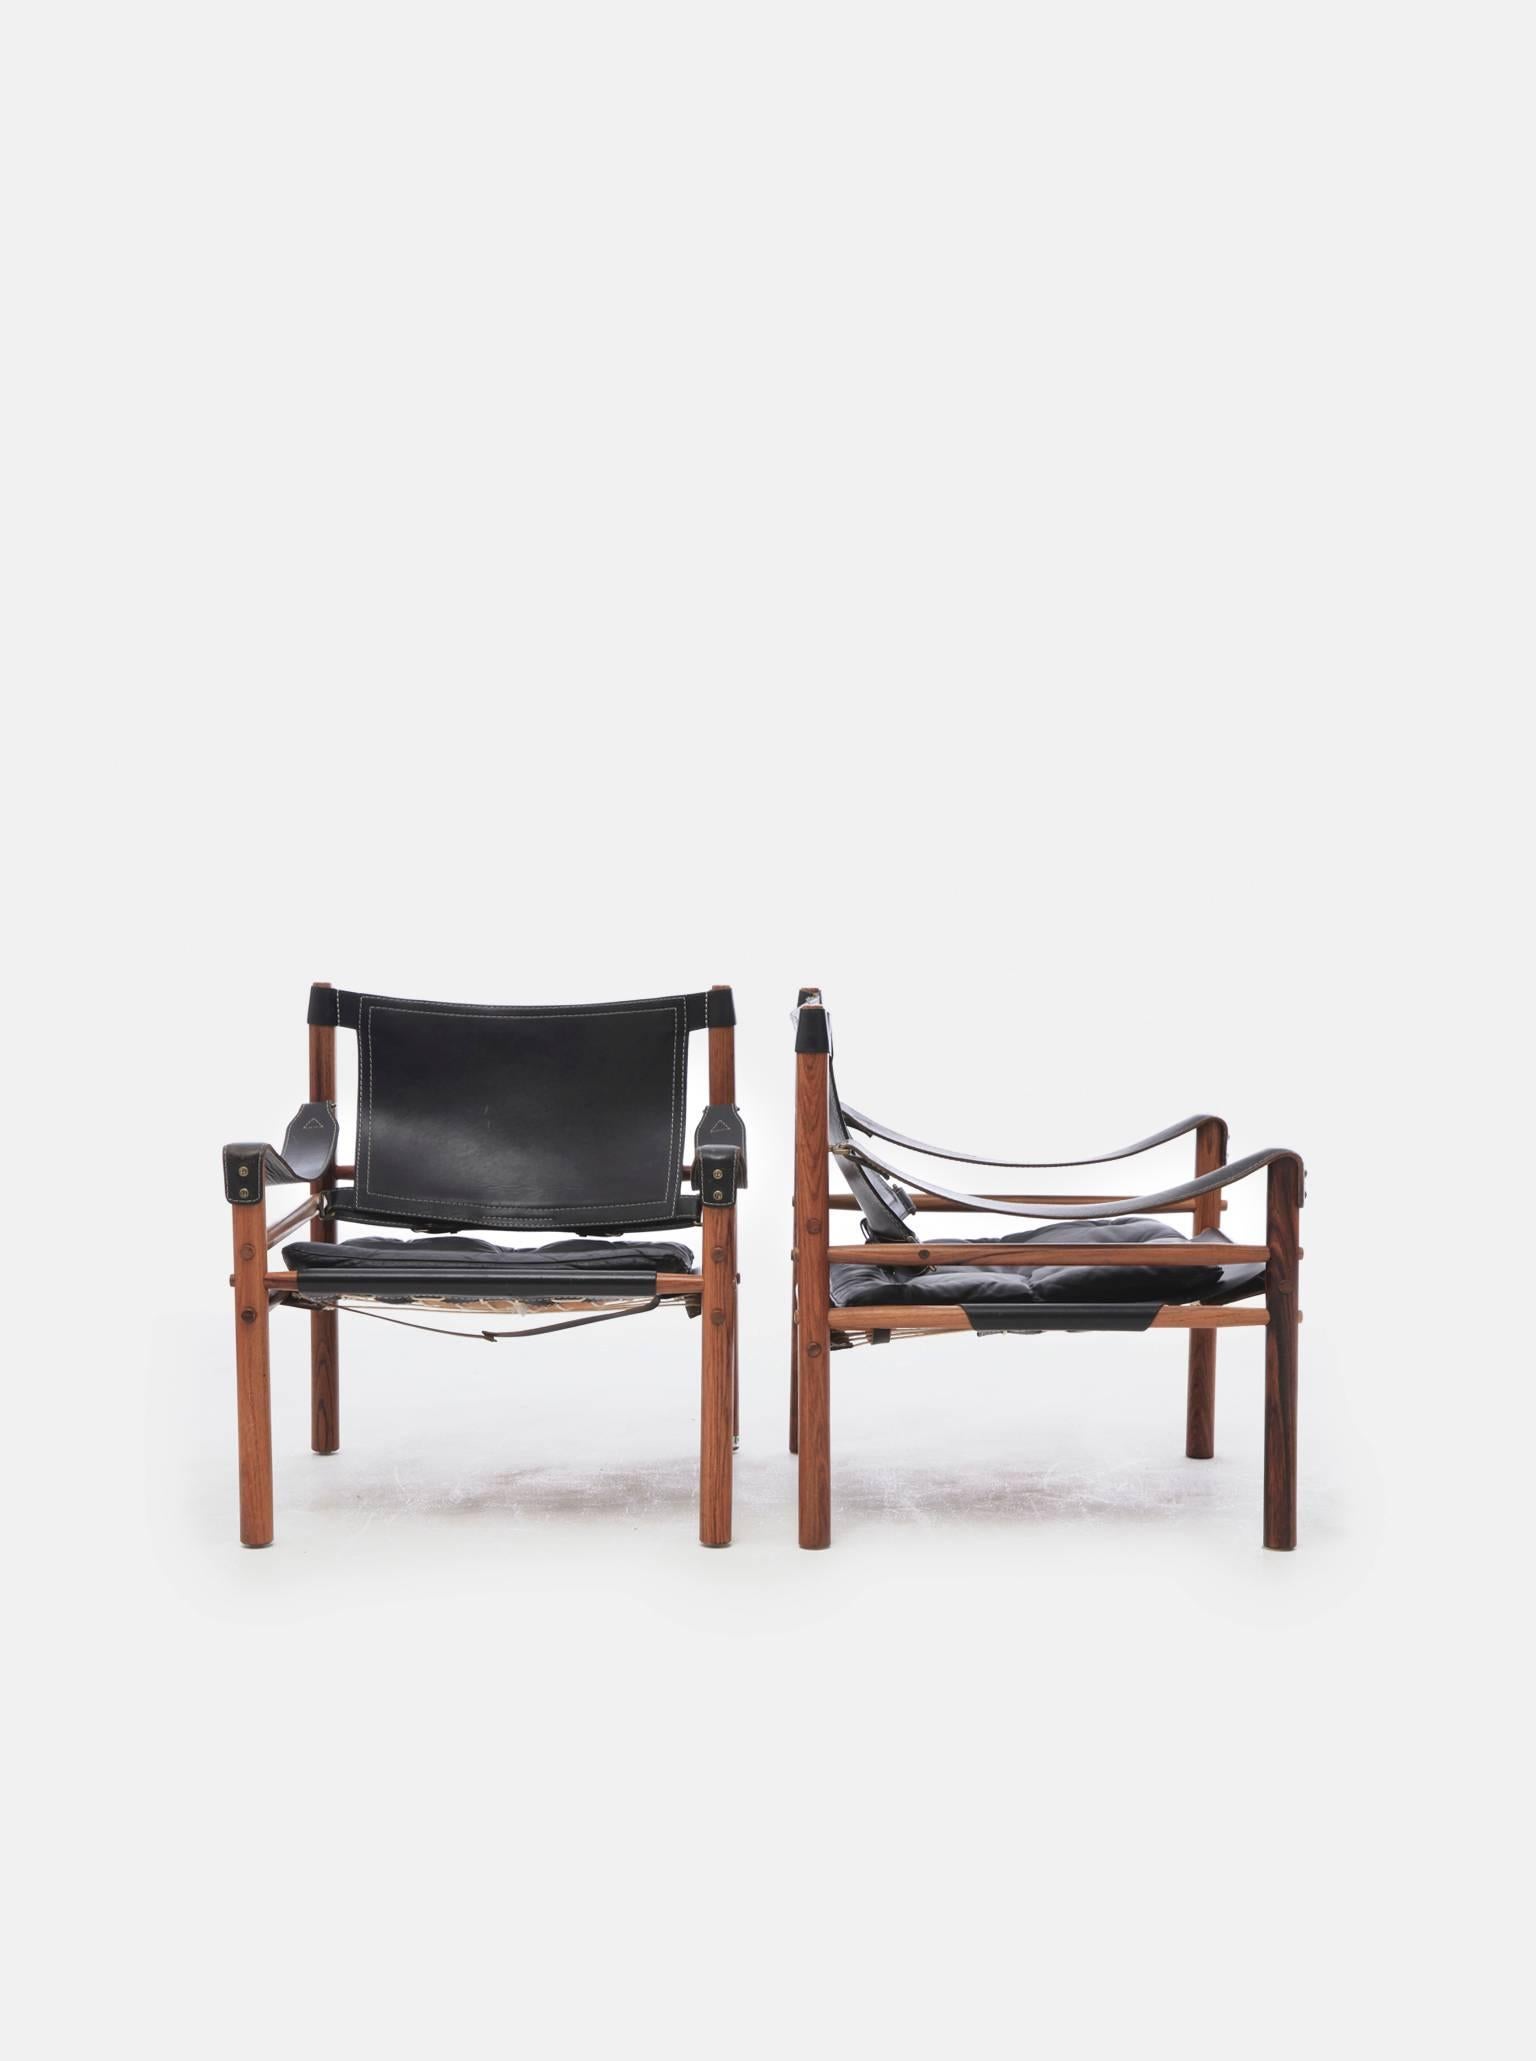 Super original pair of Arne Norell safari sirocco chair in rosewood and black leather, 1960s. Sweden. Authentic pair of chairs in very good vintage condition. Made by Aneby Mobler with makers label intact. Some minor signs of wear, relative to age